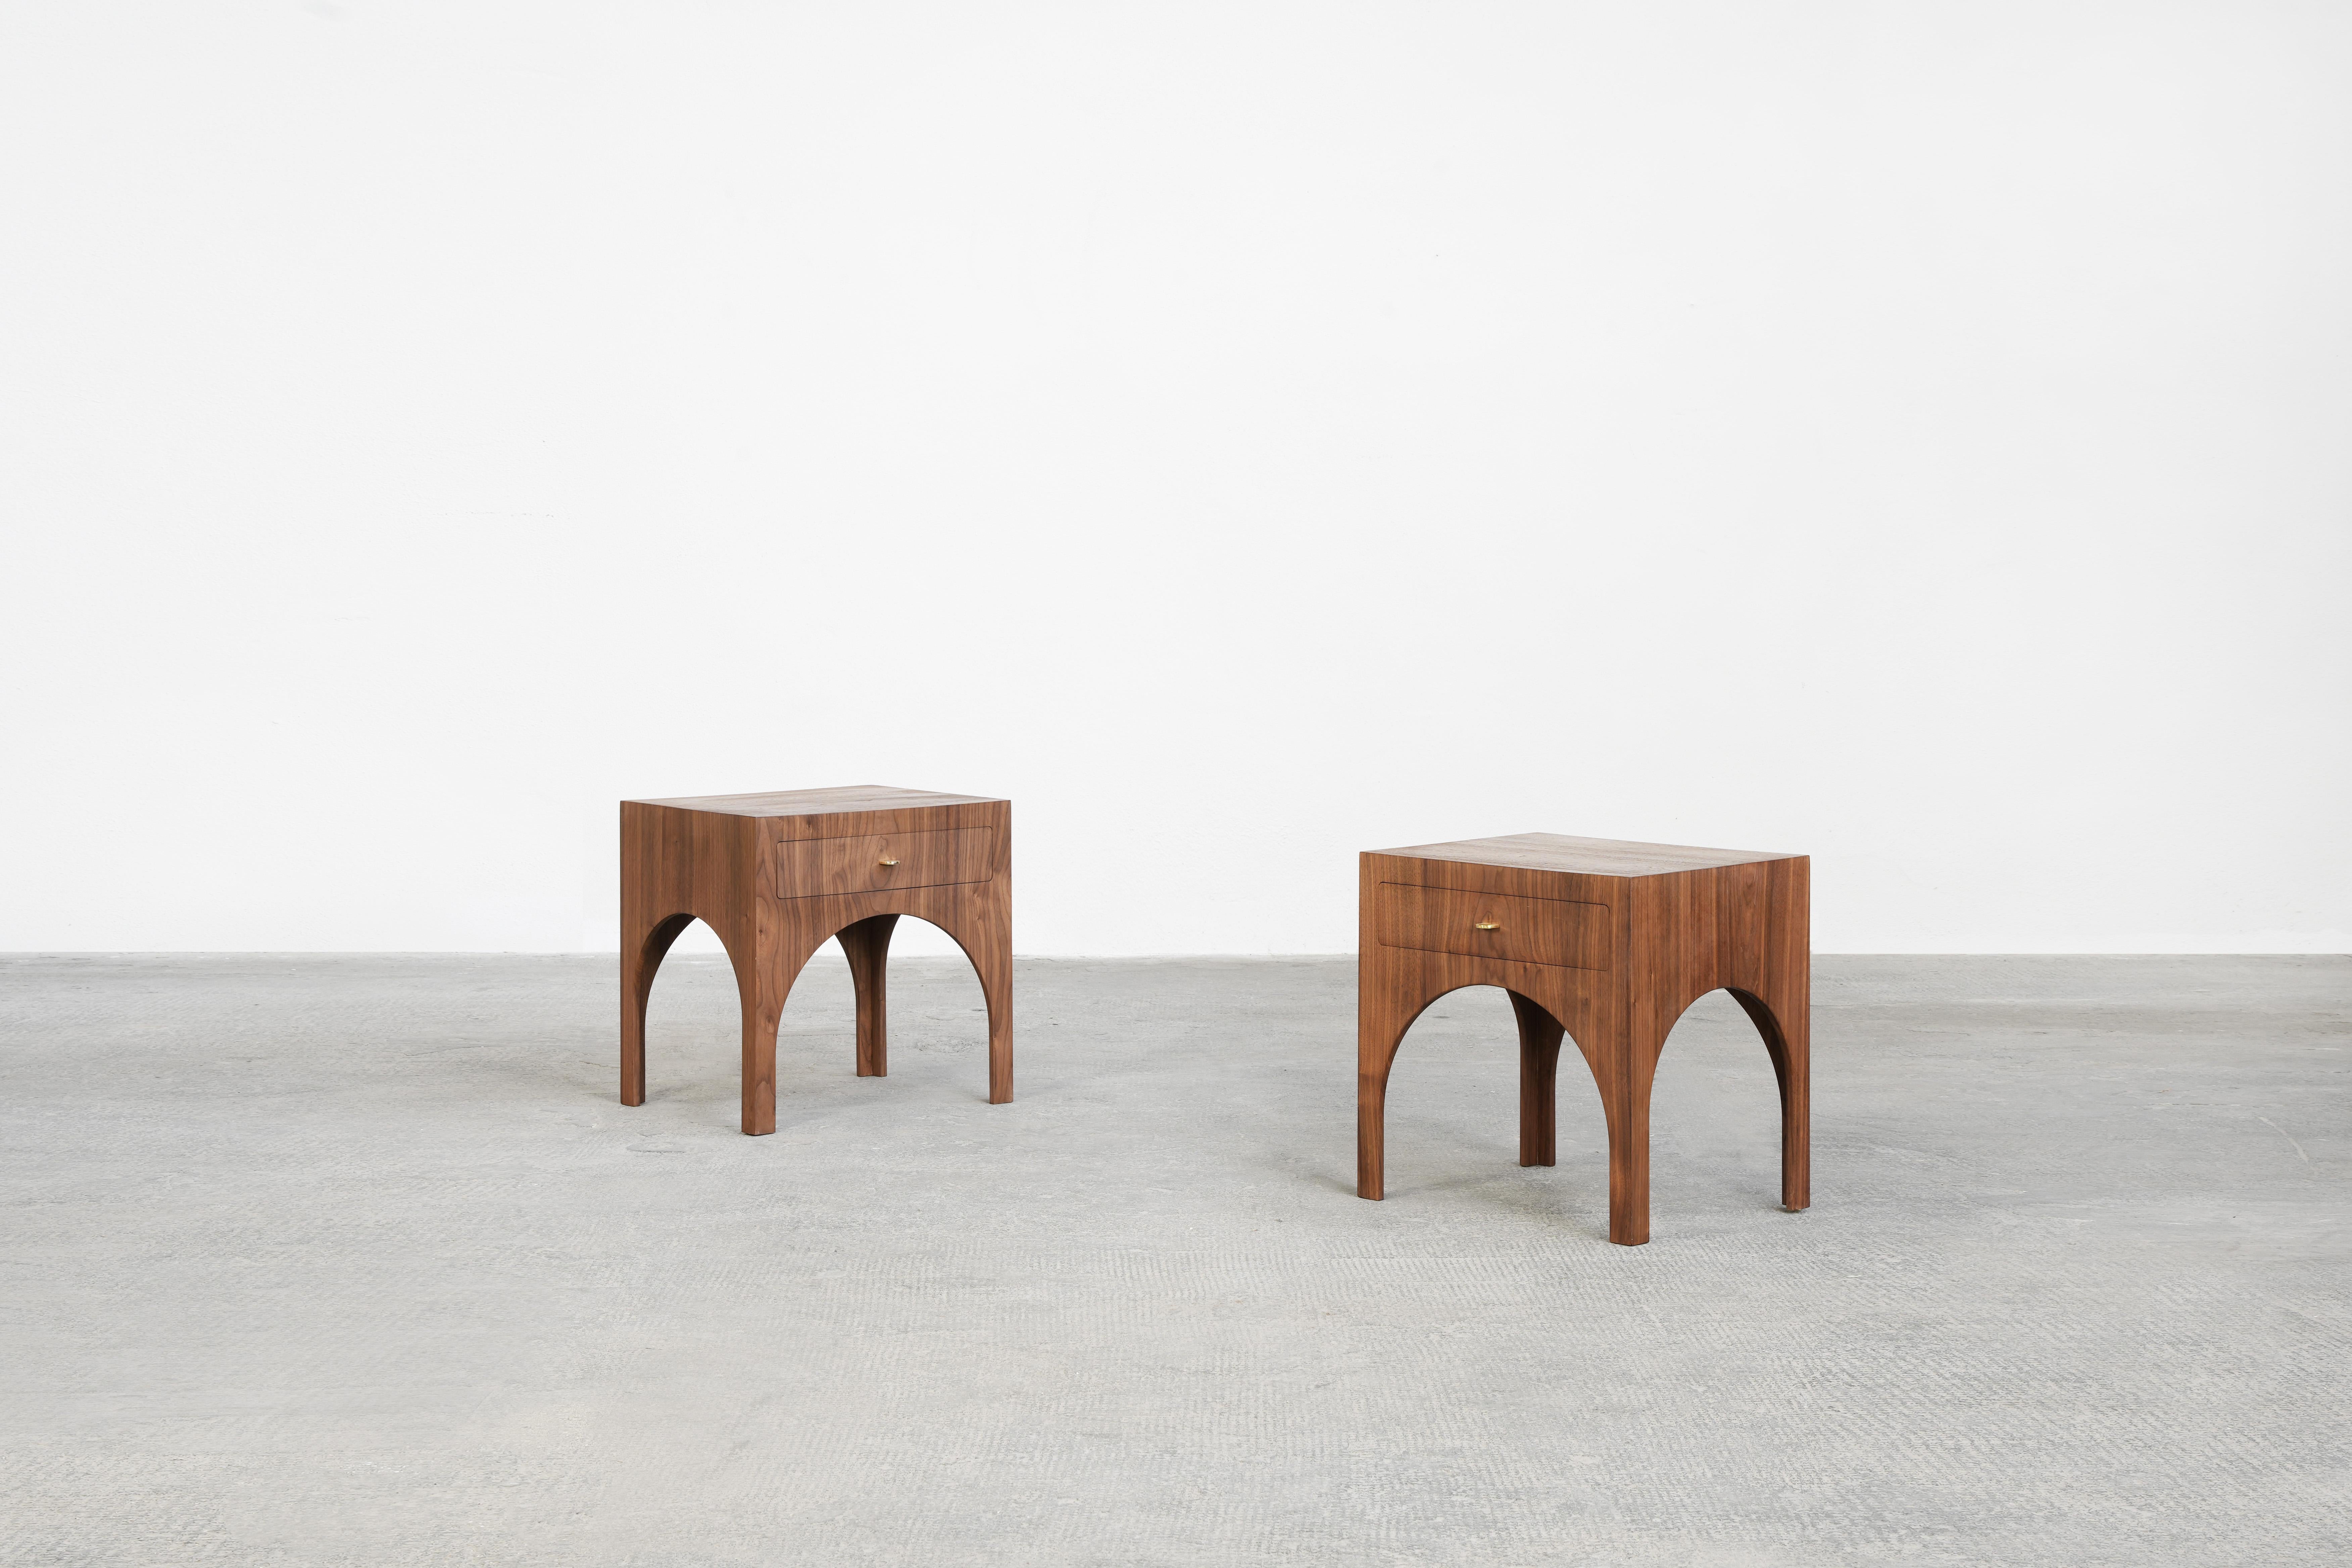 A beautiful pair of nightstands designed by Yuzo Nakamura-Bachmann, handcrafted in Germany.
These nightstands are made out of solid American Walnut and brass handles. Finished with natural furniture wax.